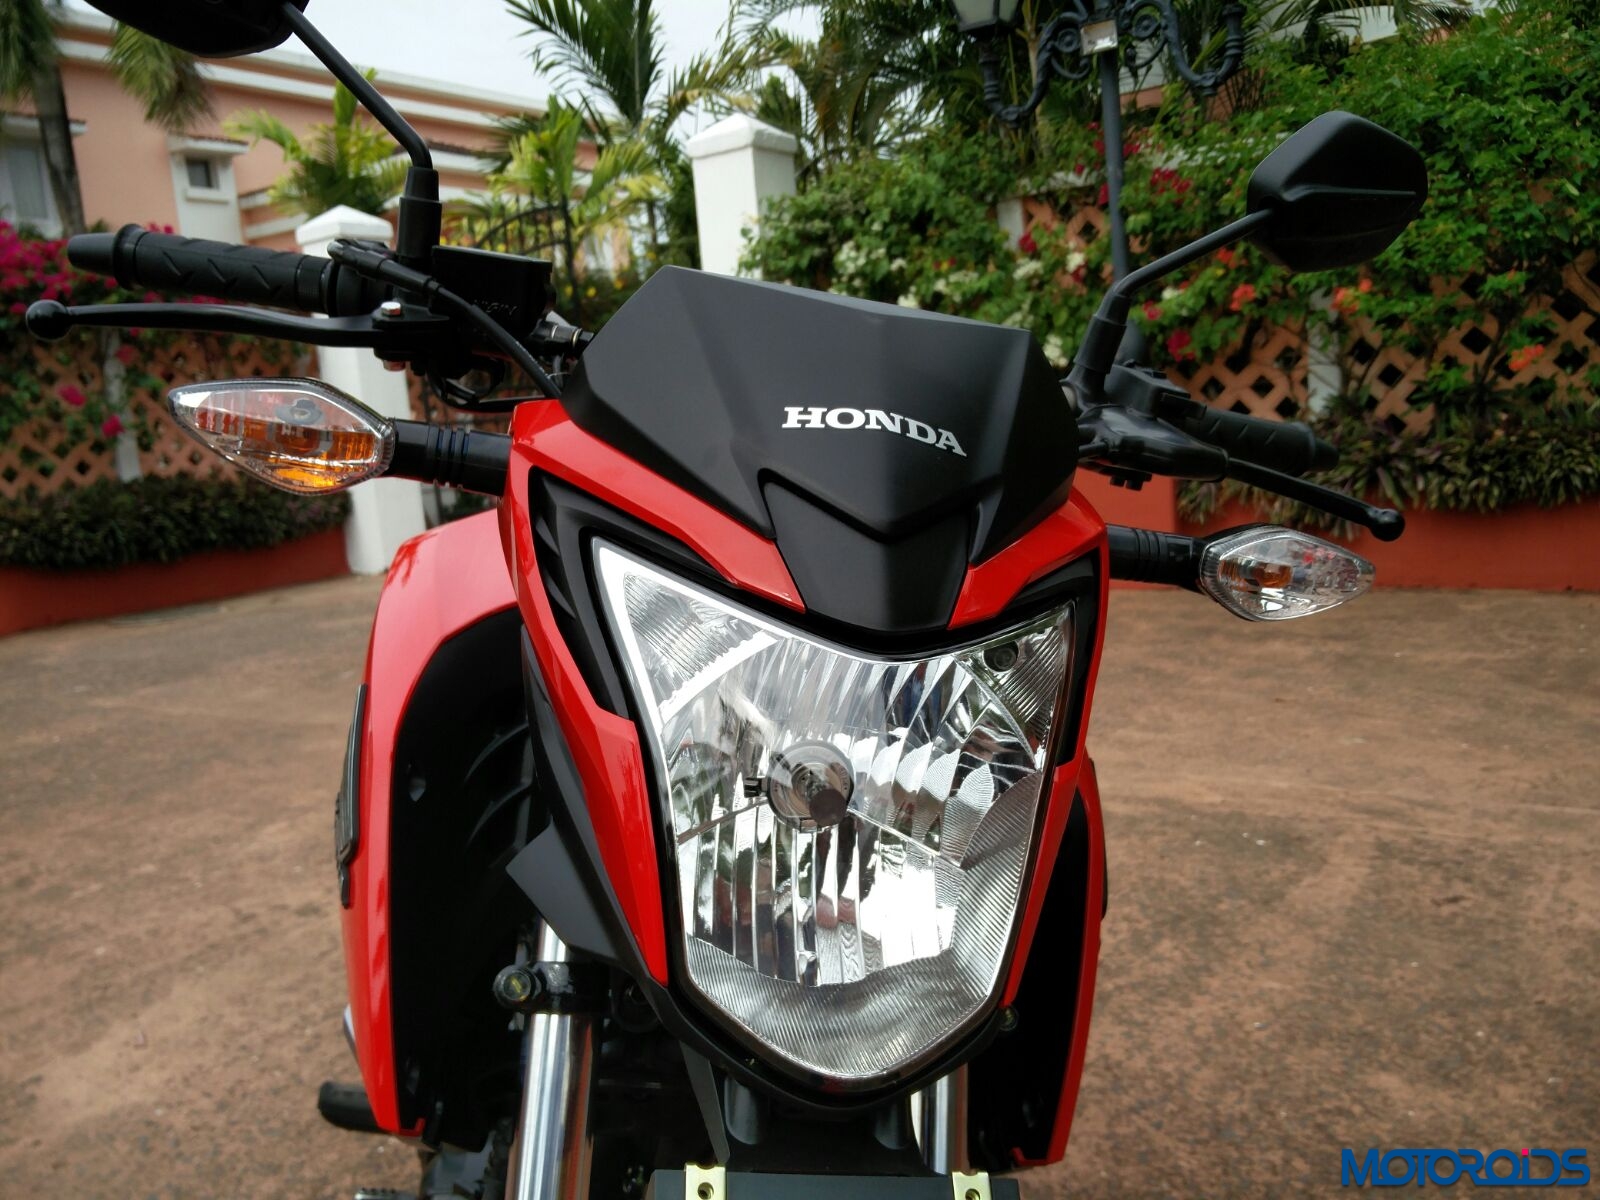 Honda Cb Hornet 160r First Ride Review Images Specs And Details Dressy Diligence